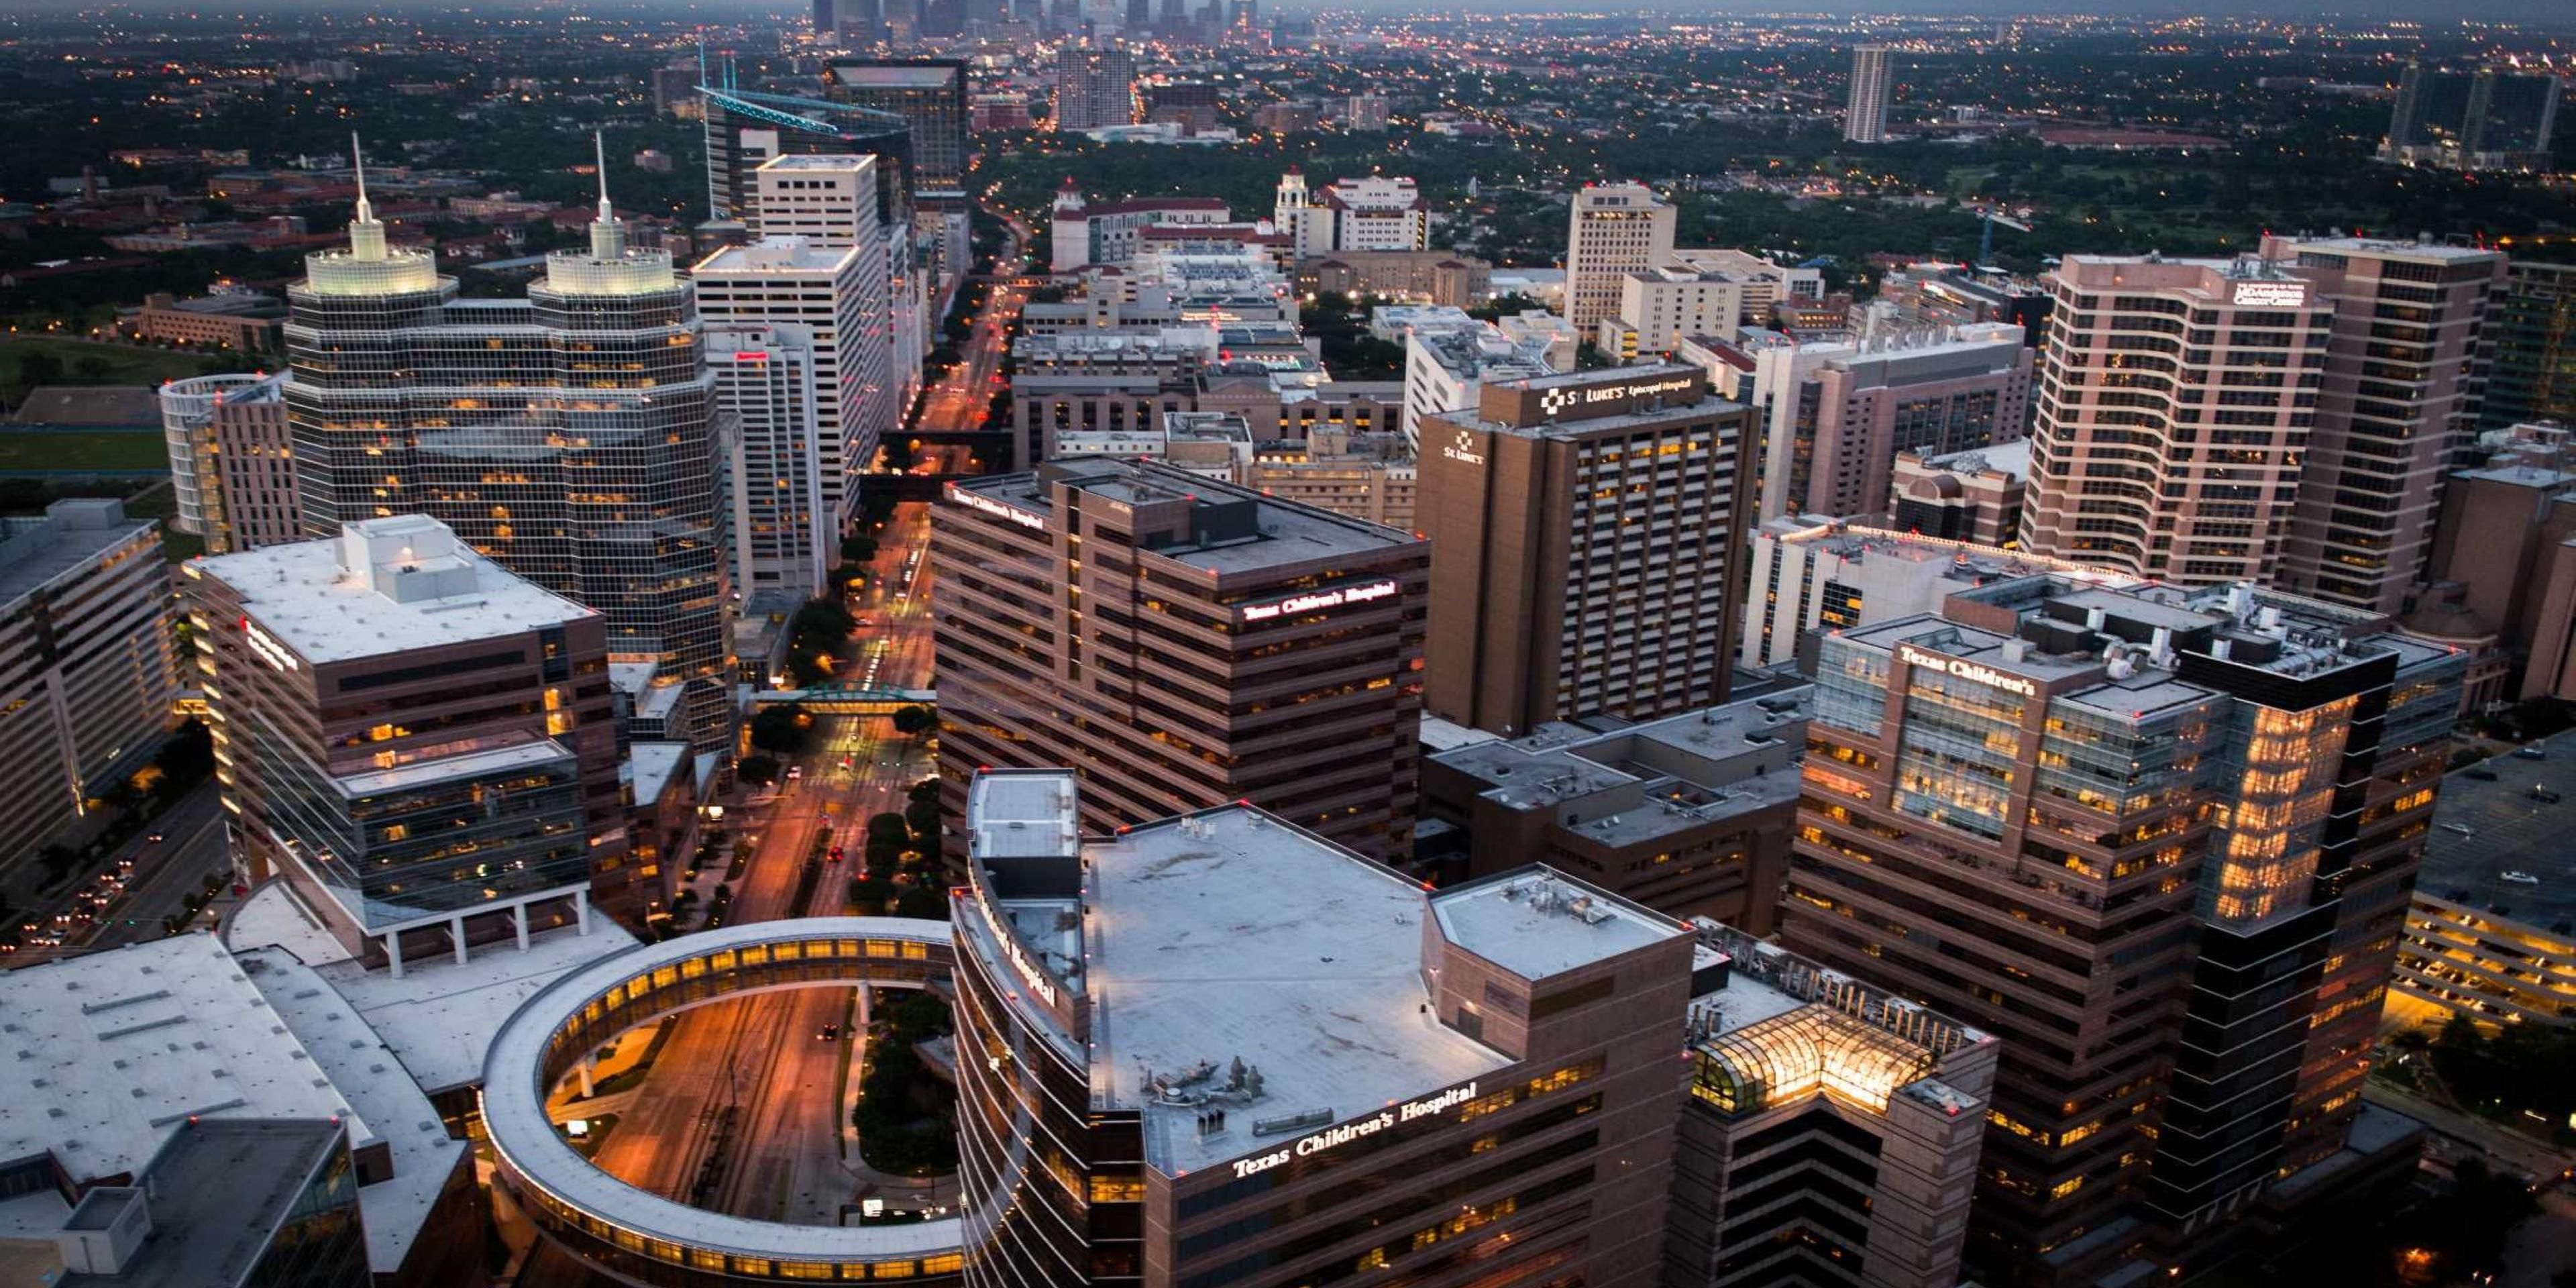 The largest medical center in the world and the 8th largest business district in the United States. With over 9,000 patient beds in 21 hospitals, the TMC sees over 180,000 patients annually.